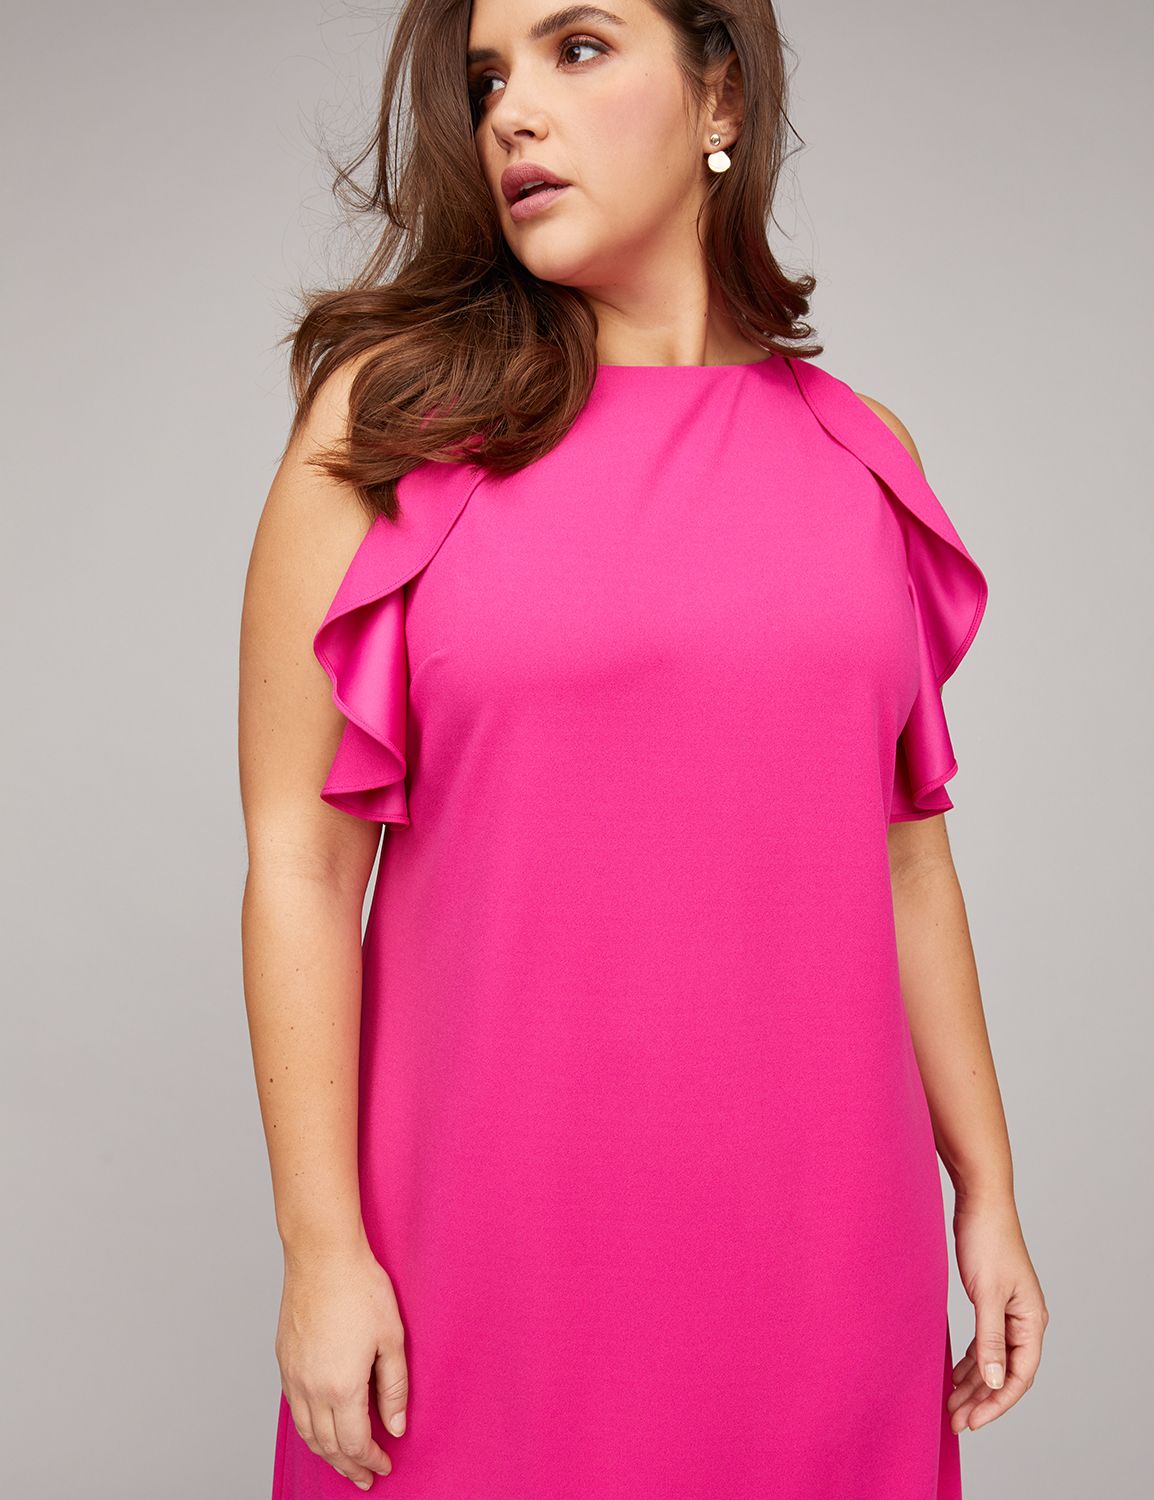 lane bryant special occasion